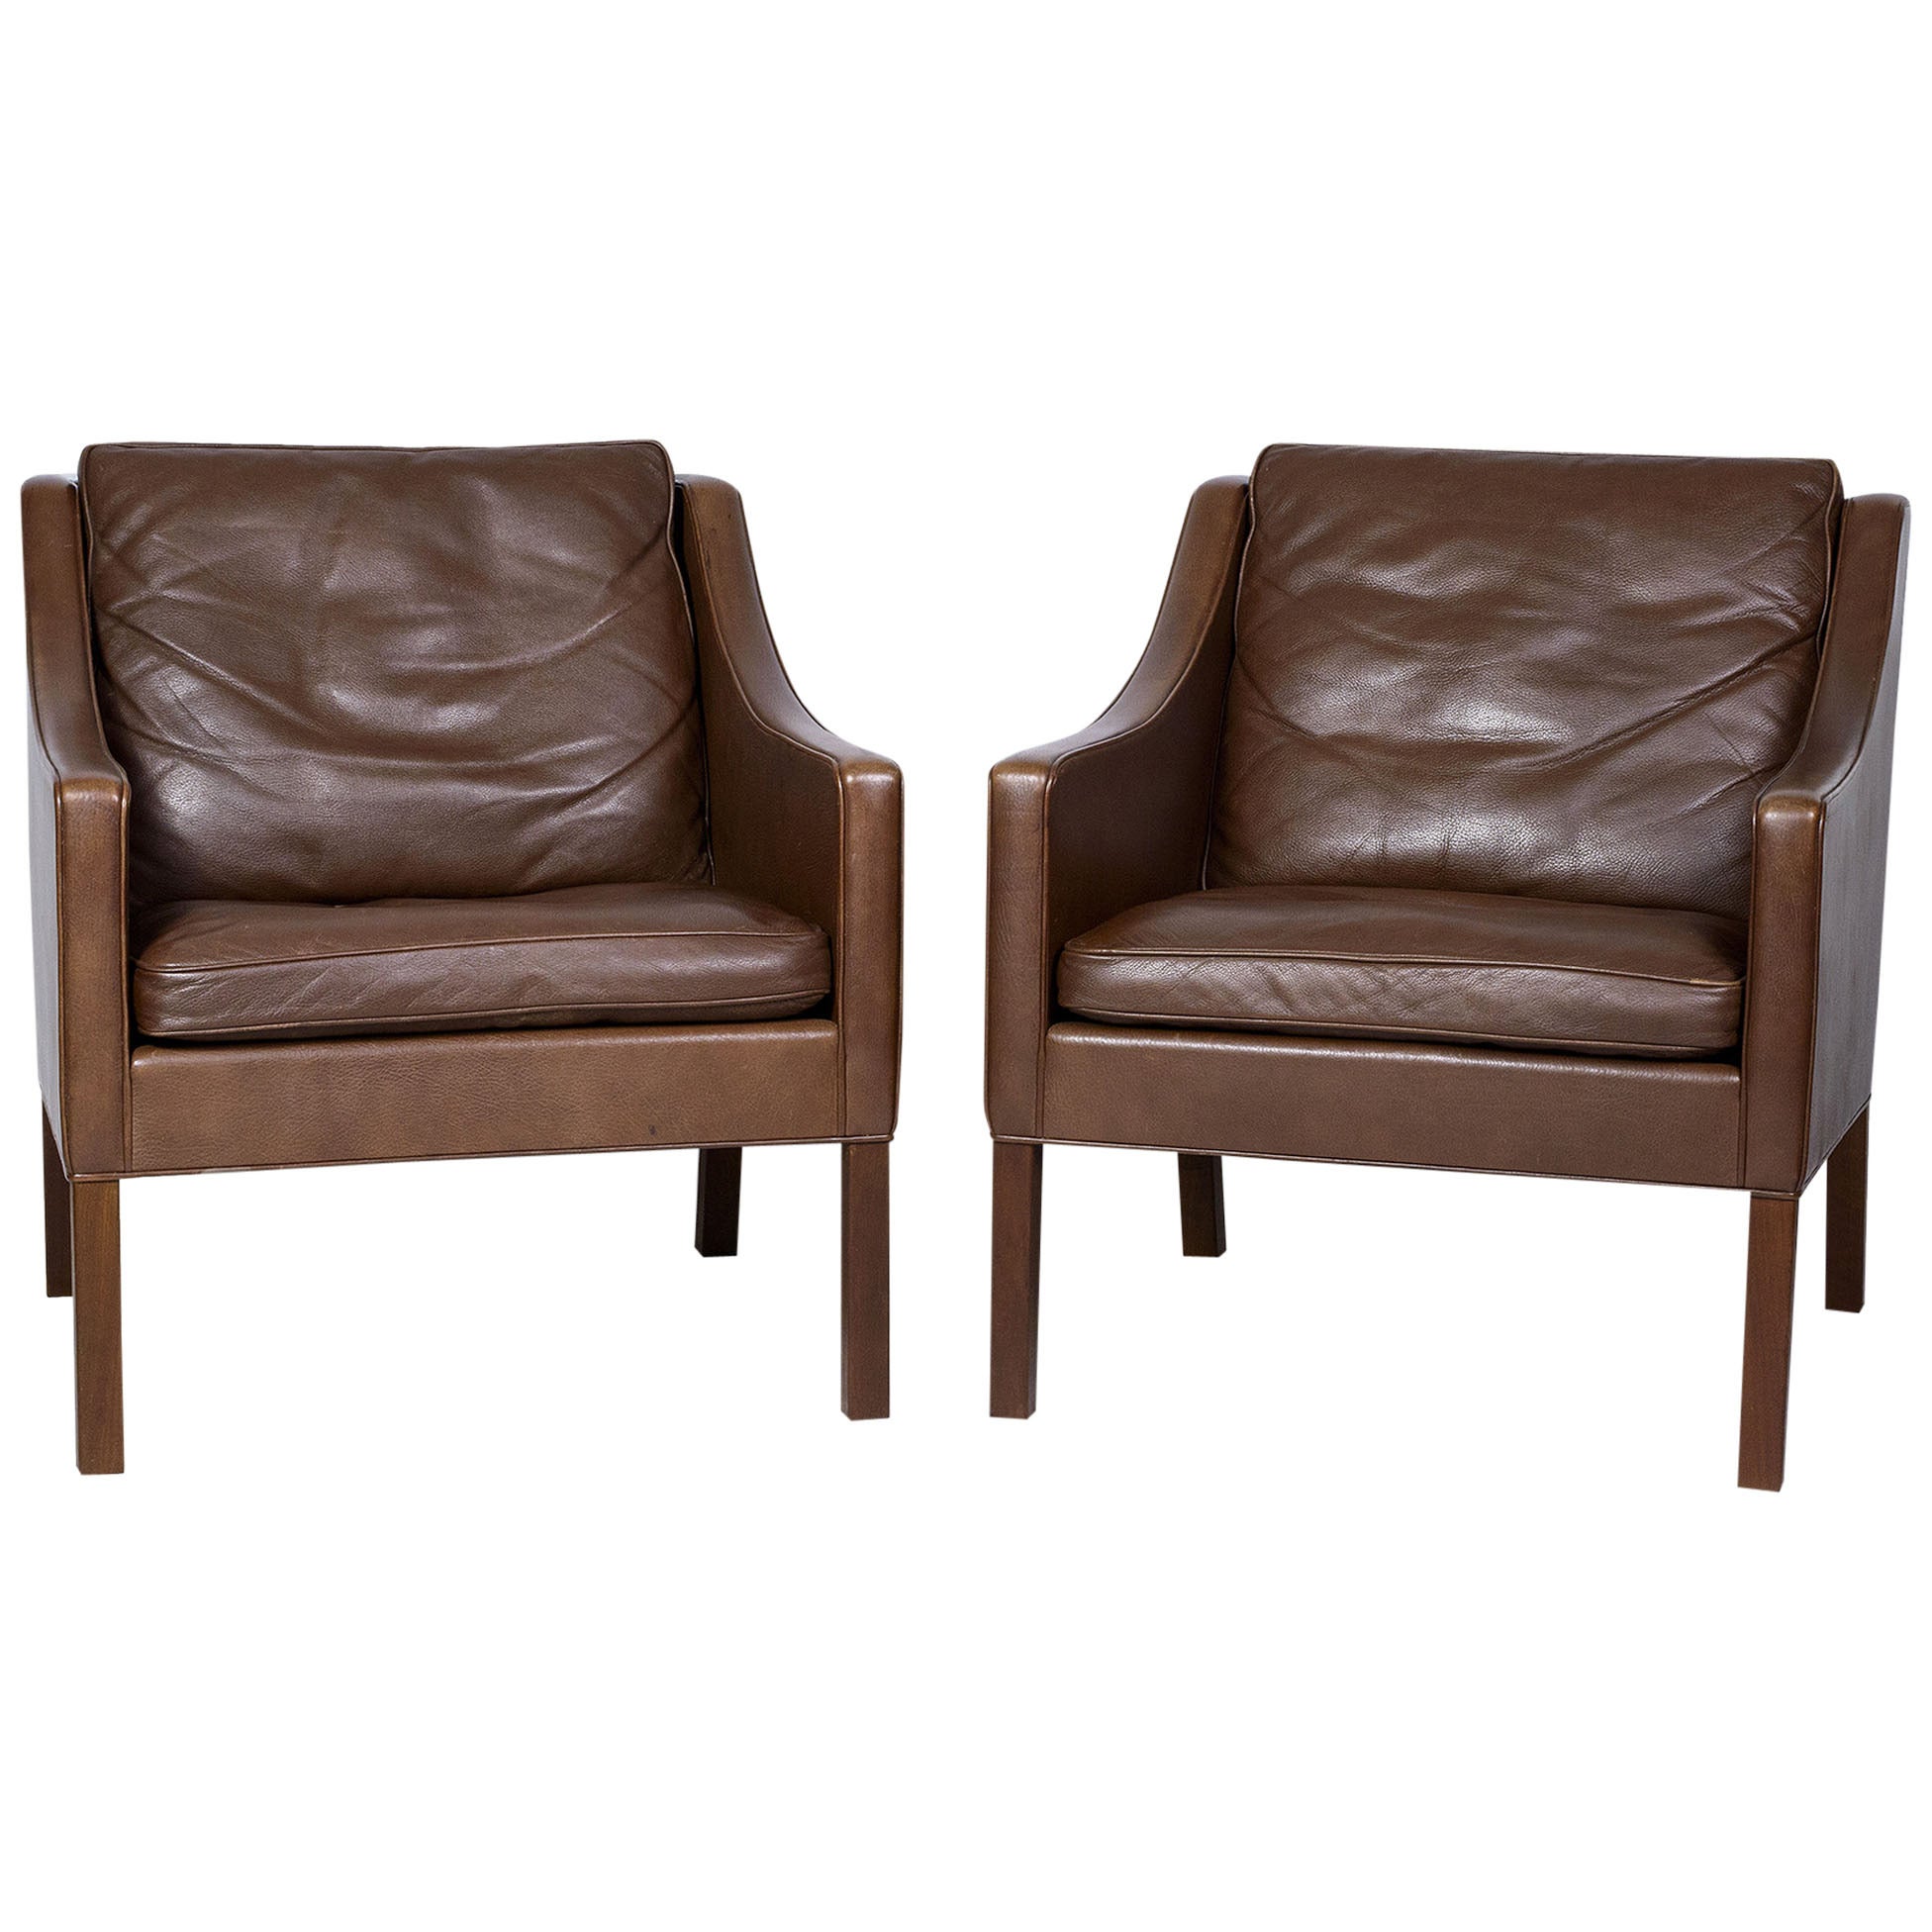 Pair of Borge Mogensen Model #2207 Leather Lounge Chairs